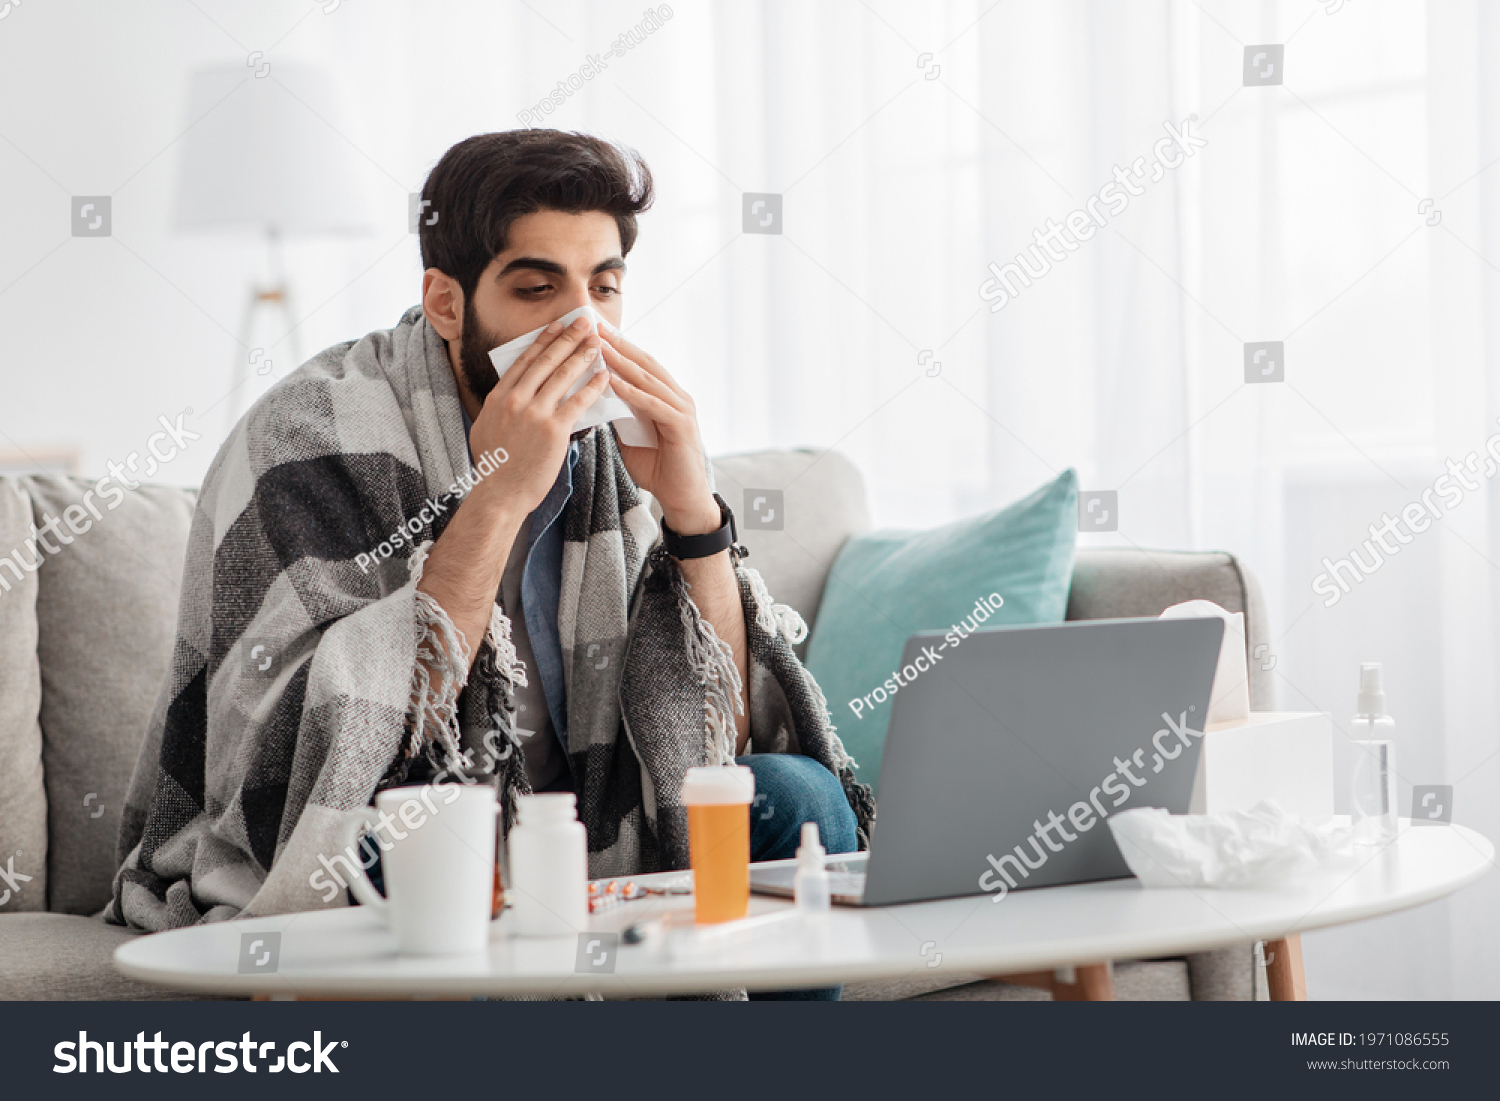 Ill arab man covered in warm blanket looking at laptop screen and sneezing nose in paper tissue, sitting on sofa at home, empty space. Sinusitis illness, cold and influenza symptoms #1971086555